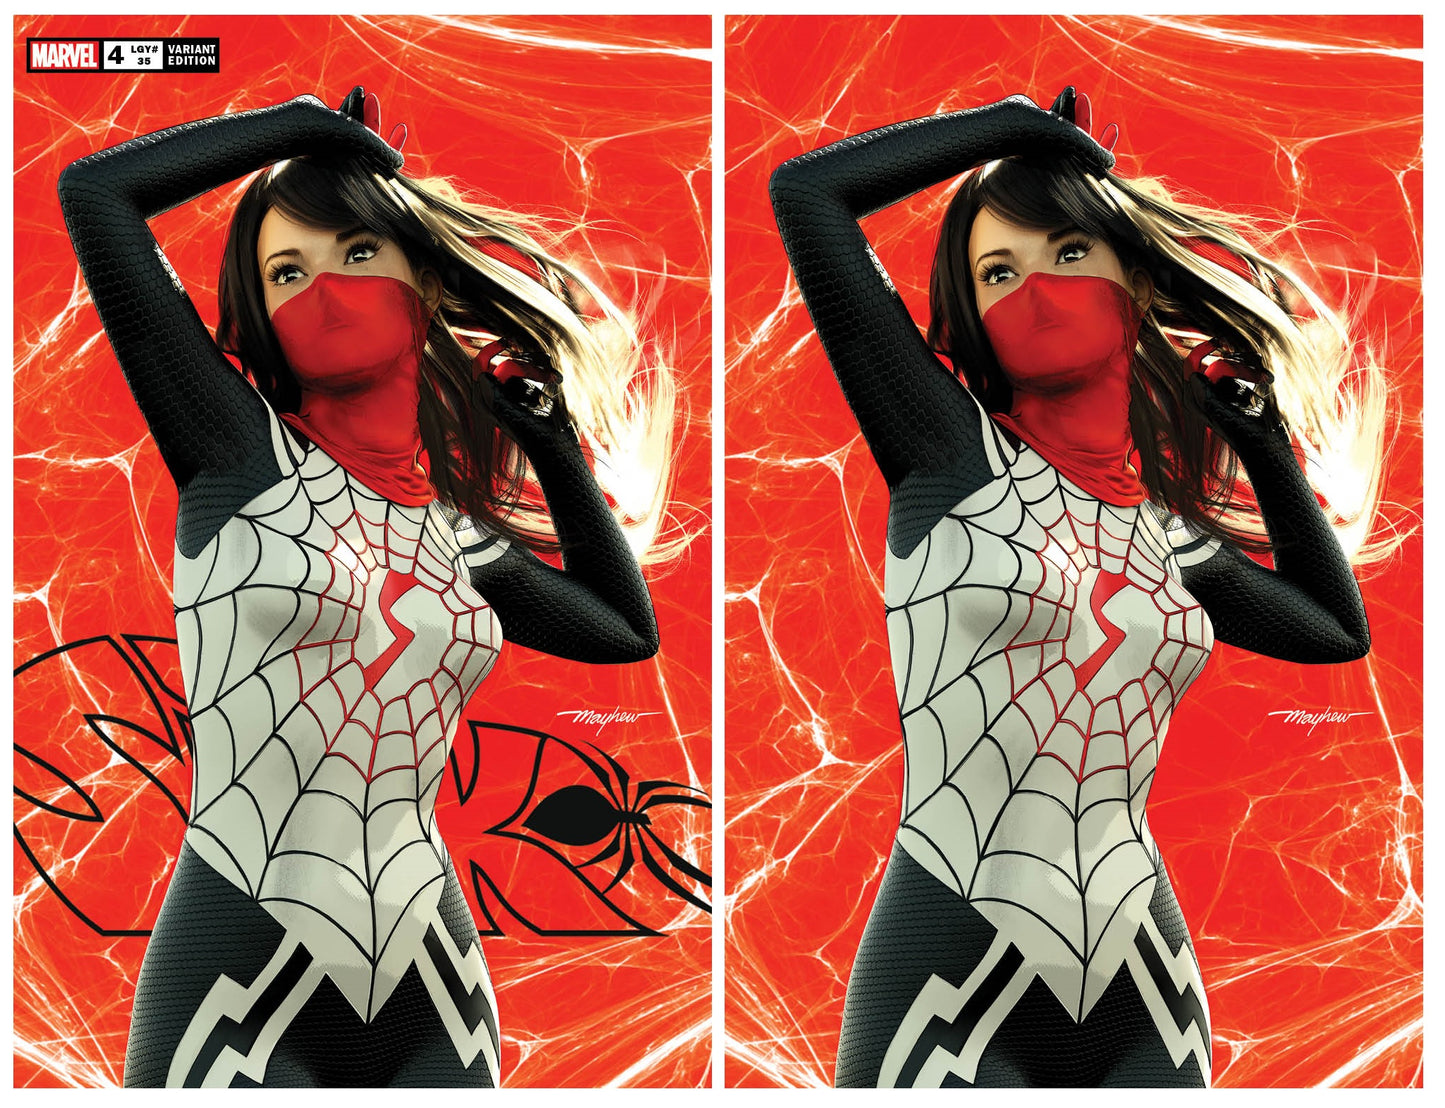 SILK #4 MIKE MAYHEW TRADE/VIRGIN VARIANT SET LIMITED TO 1000 SETS